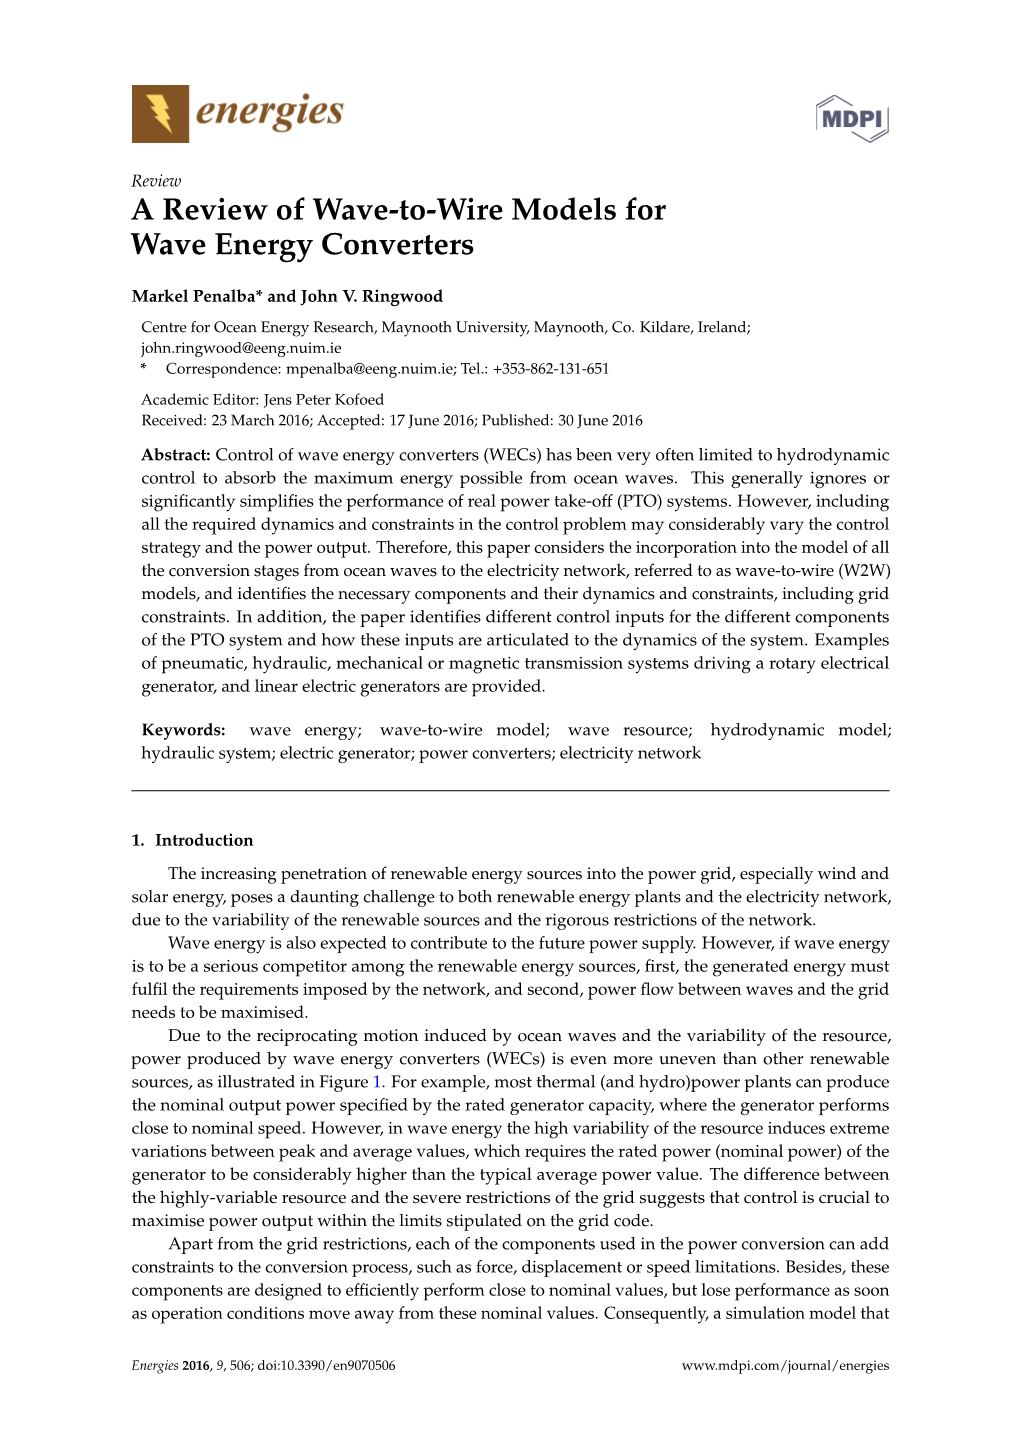 A Review of Wave-To-Wire Models for Wave Energy Converters